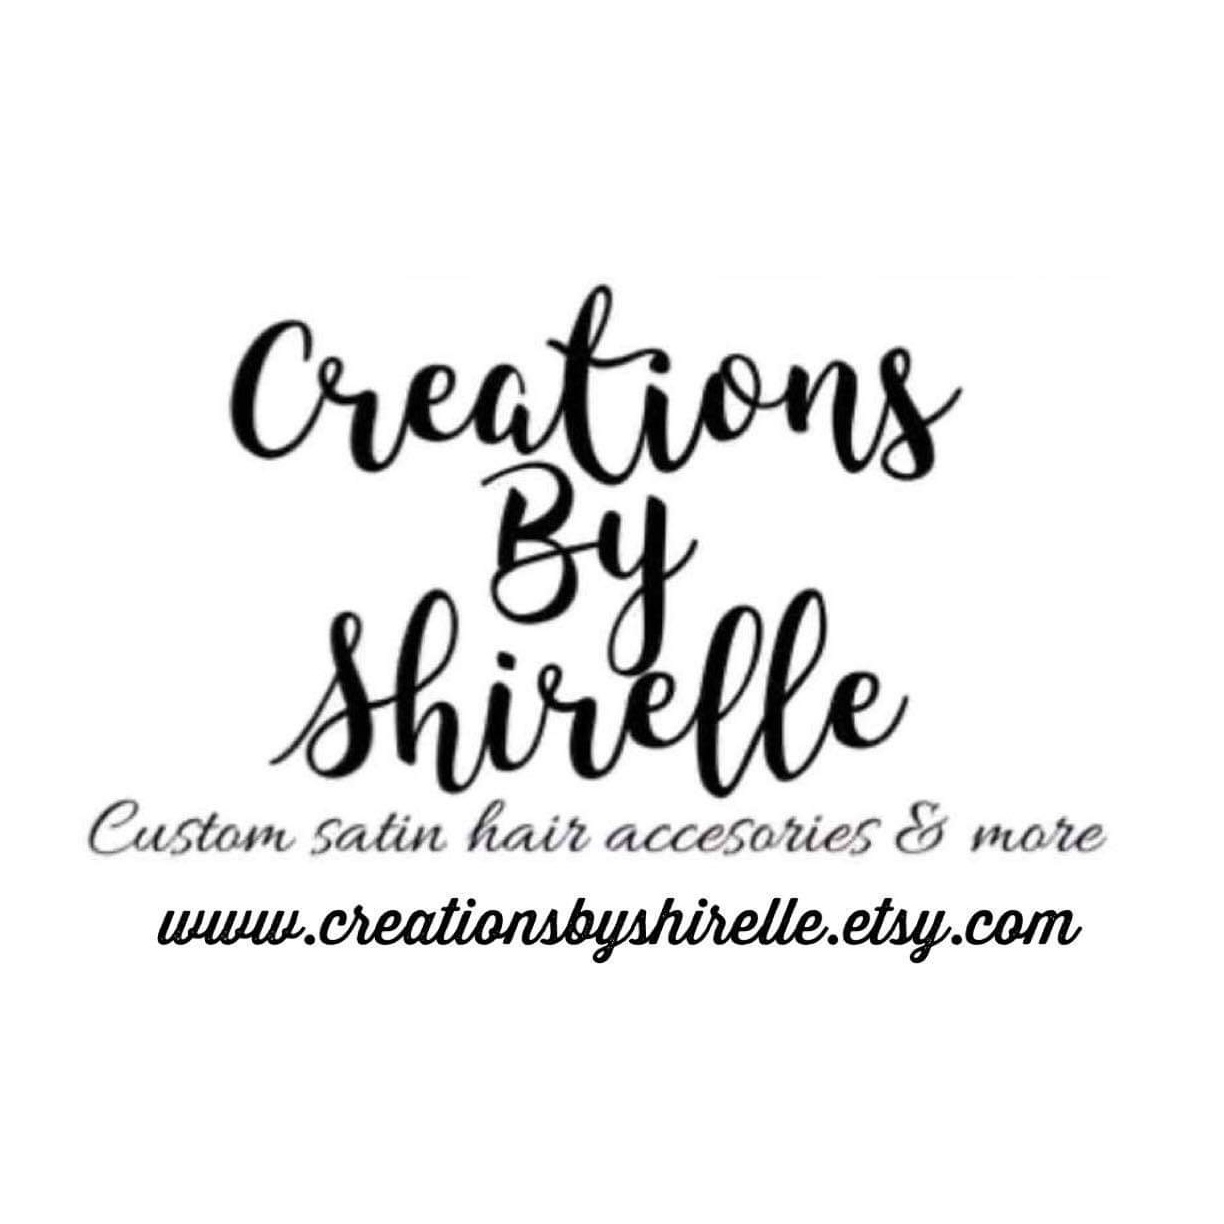 Creations By Shirelle: Custom Satin Hair Accessories & More